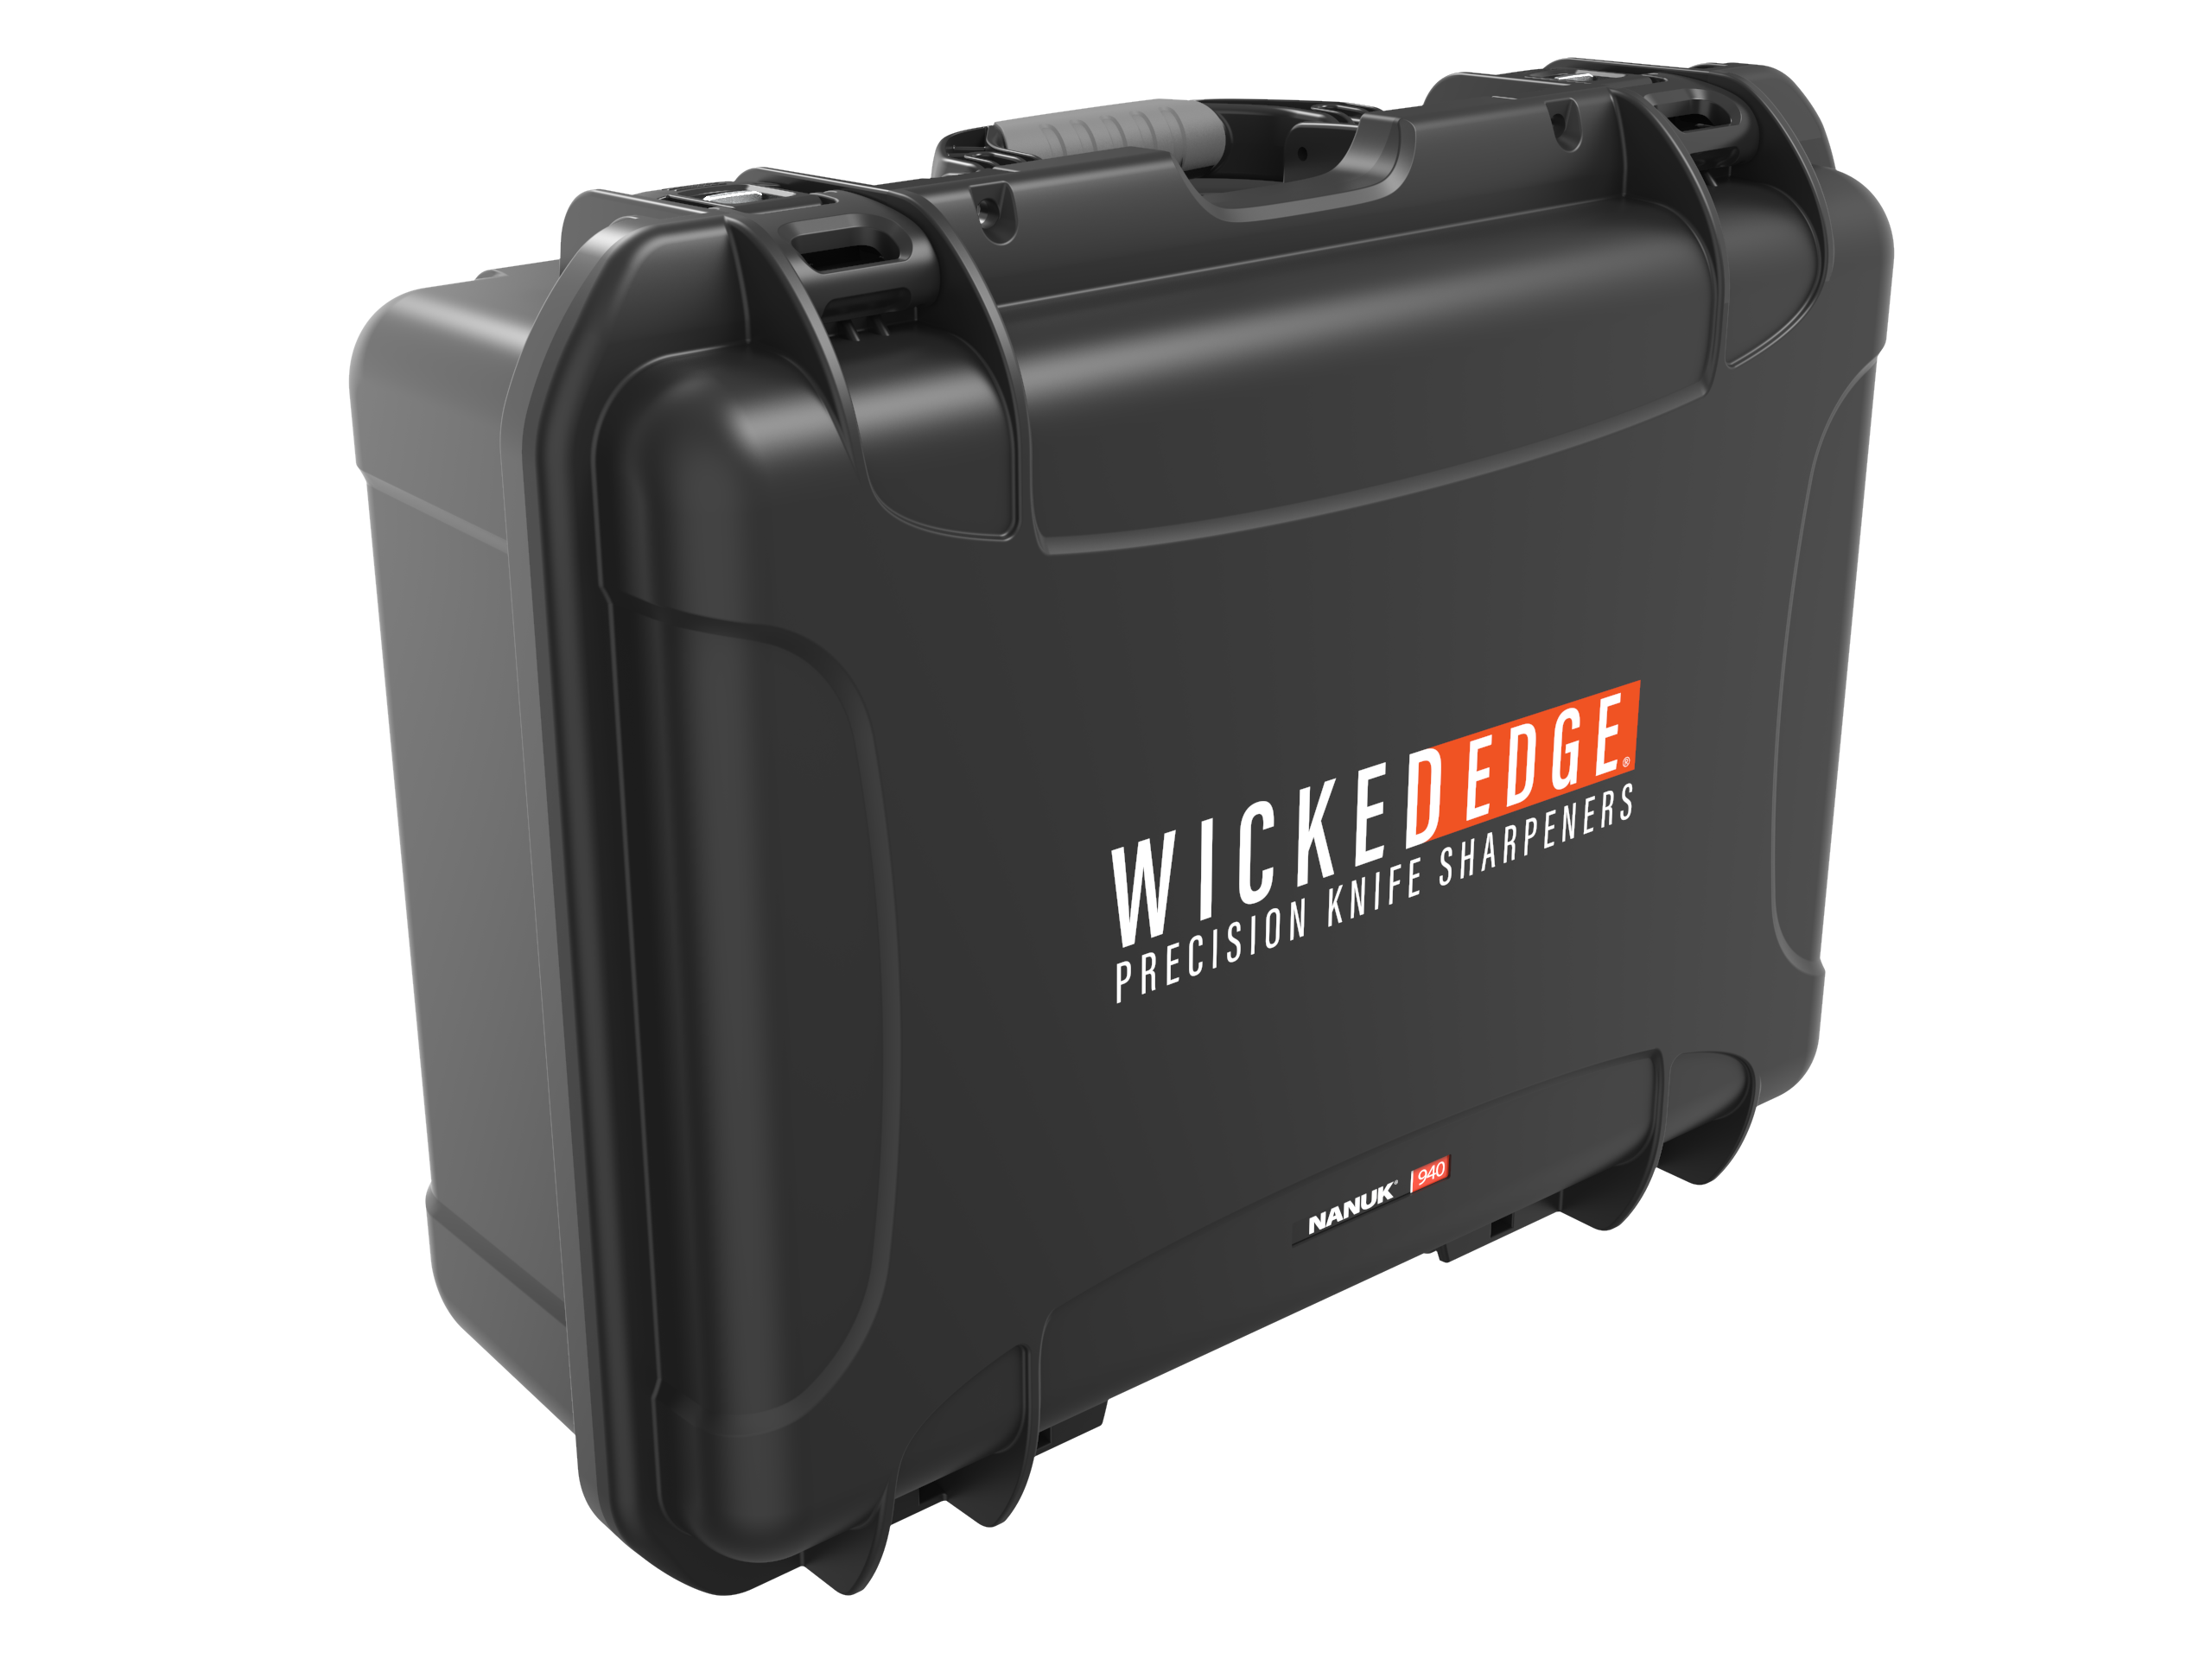 W.E. Rack-Its Stone Holders for Sale – Wicked Edge Precision Knife